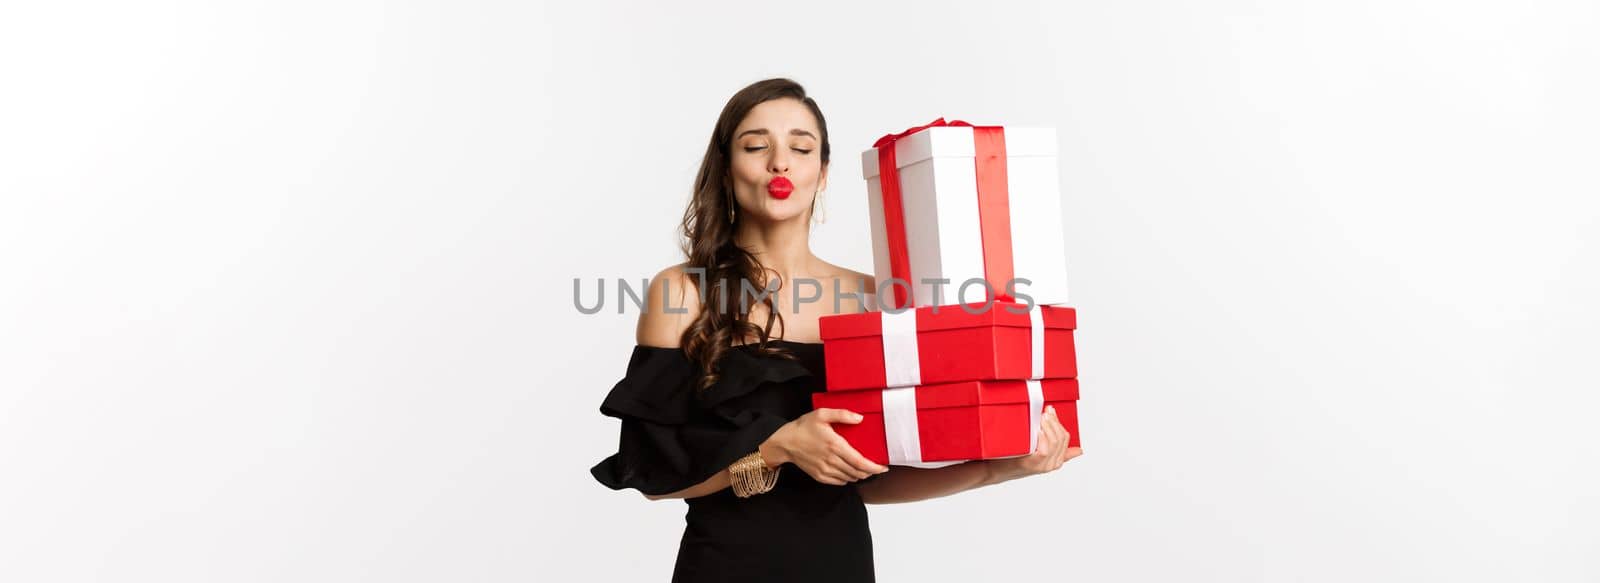 Celebration and christmas holidays concept. Silly woman in elegant black dress, holding xmas and new year presents, pucker lips for kiss, standing happy over white background.